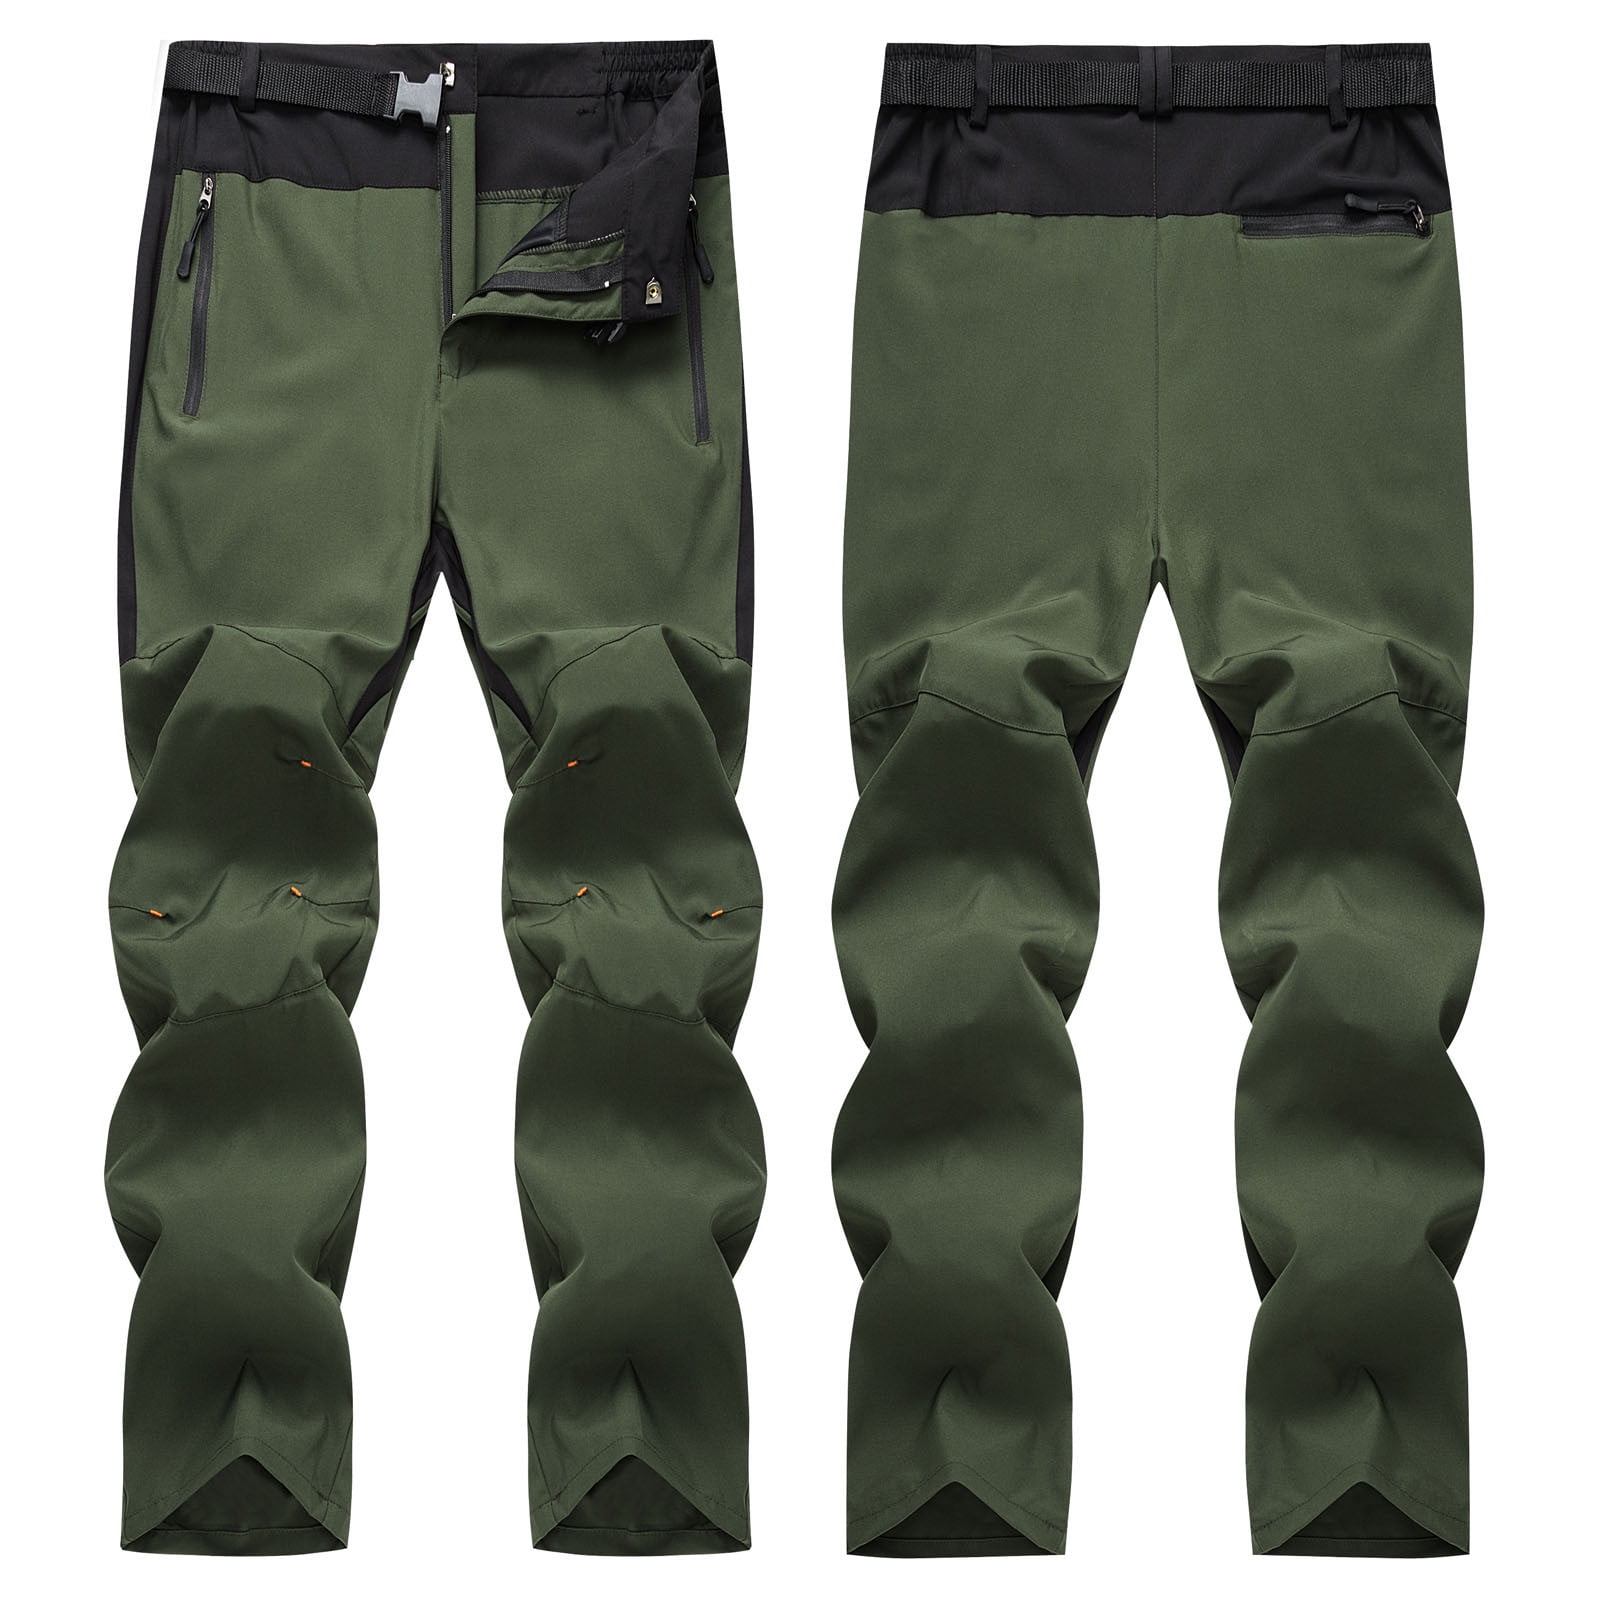 Cethrio Mens Lightweight Cargo Pants- Fall and Winter Outdoor